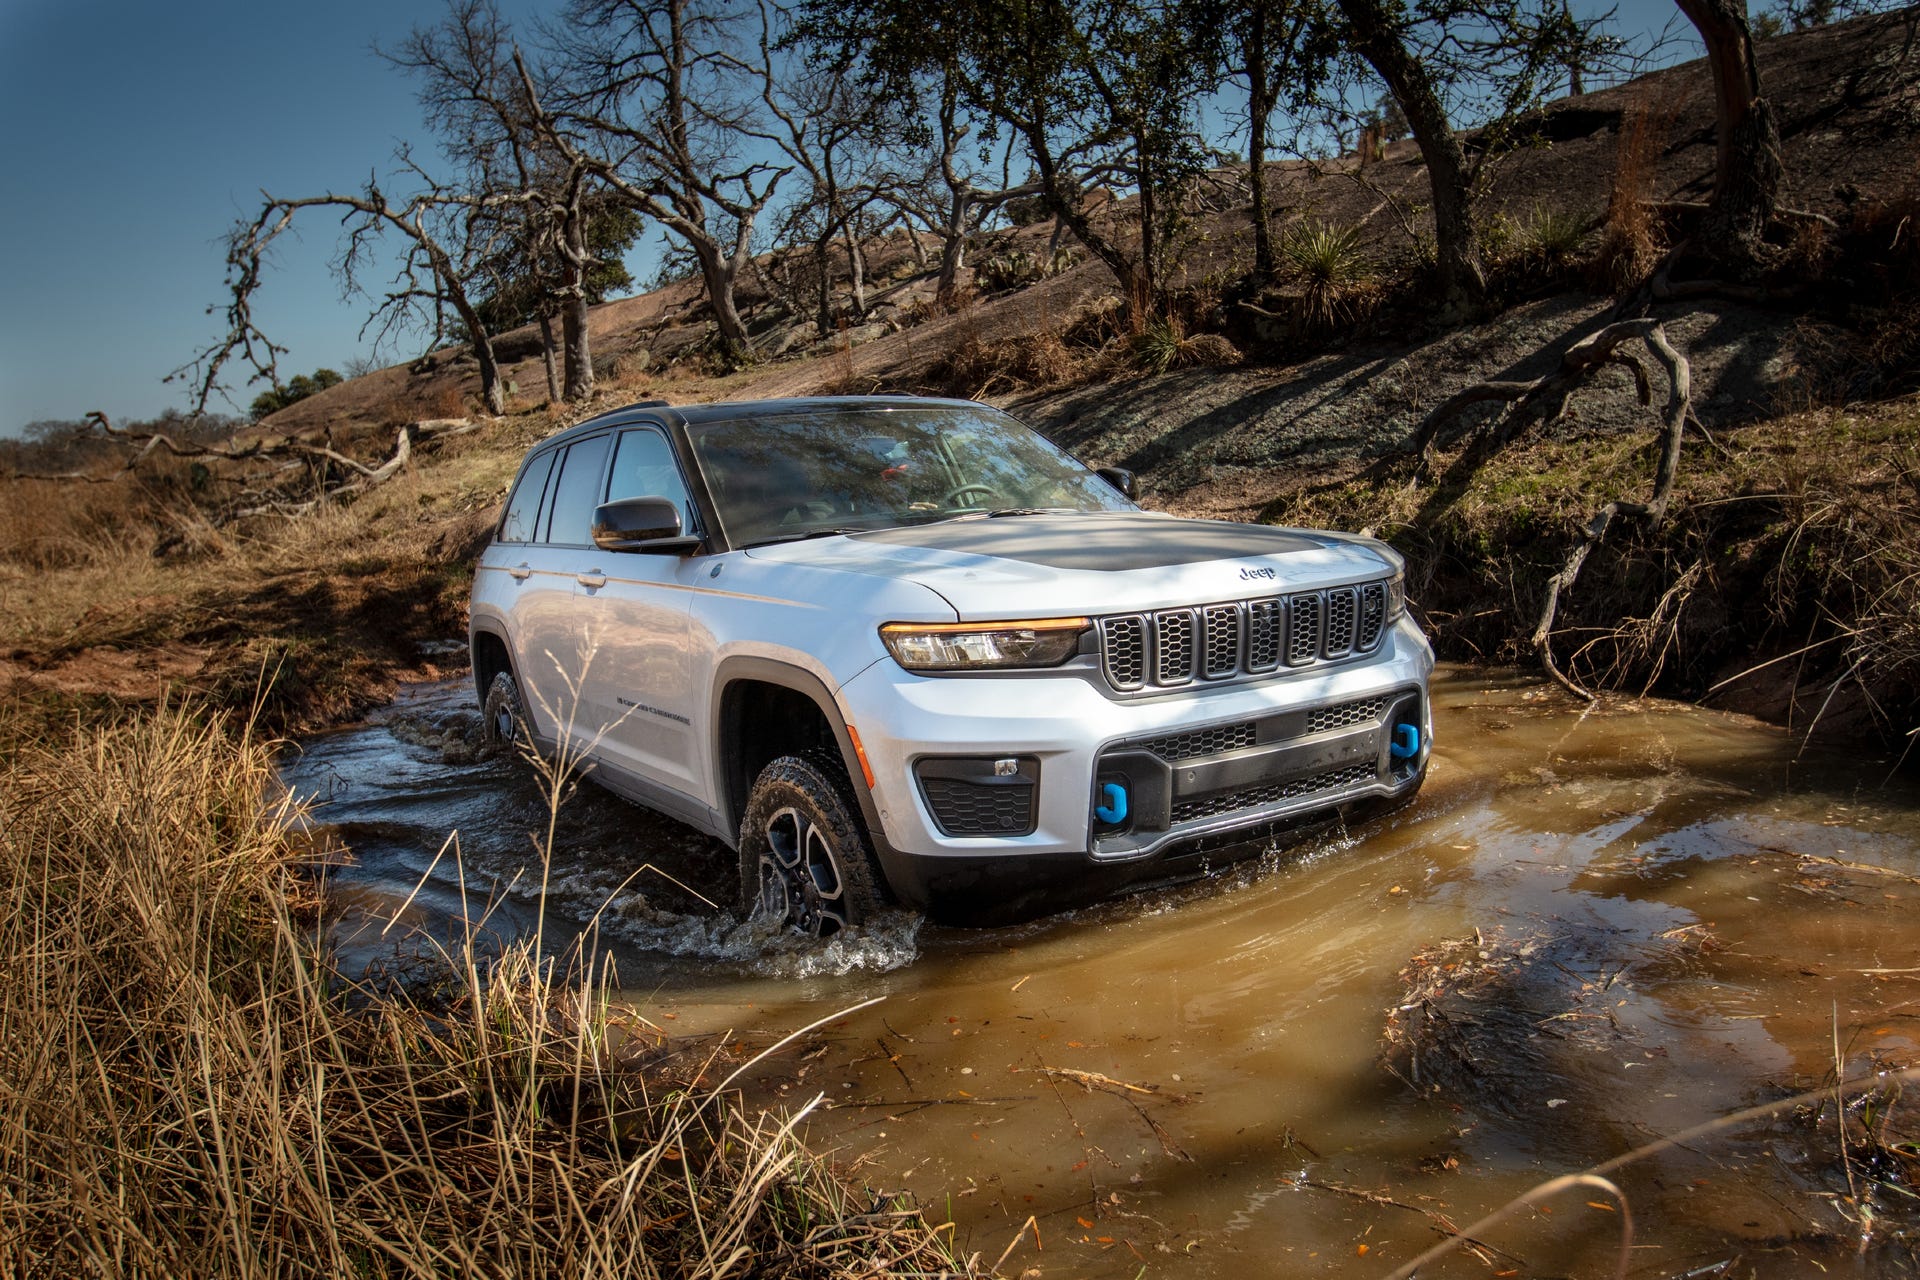 Front 3/4 view of a 2022 Jeep Grand Cherokee 4xe wading through muddy water